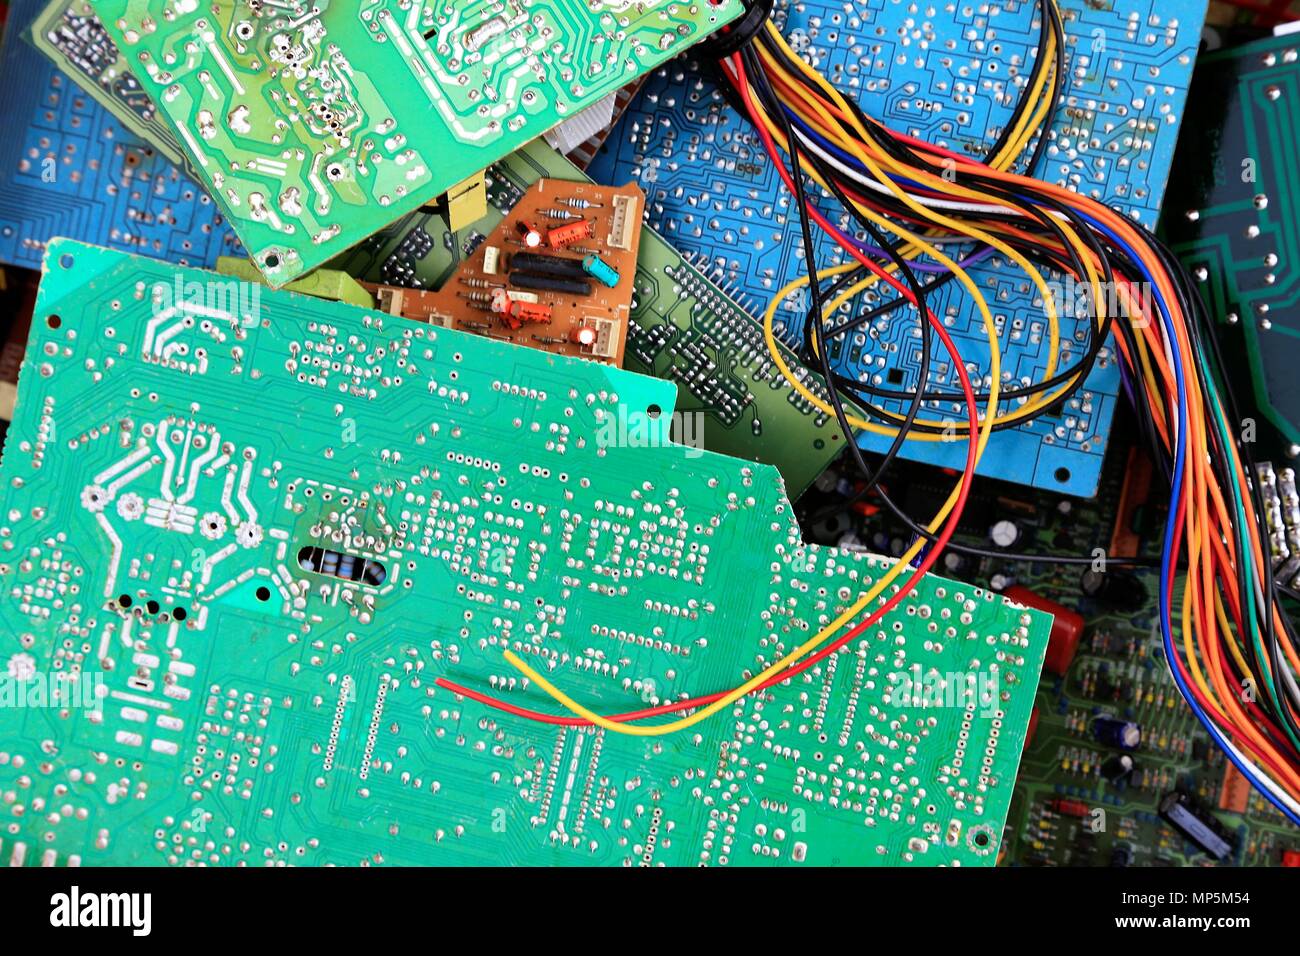 Printed circuit boards from vintage computers, 1990s Stock Photo